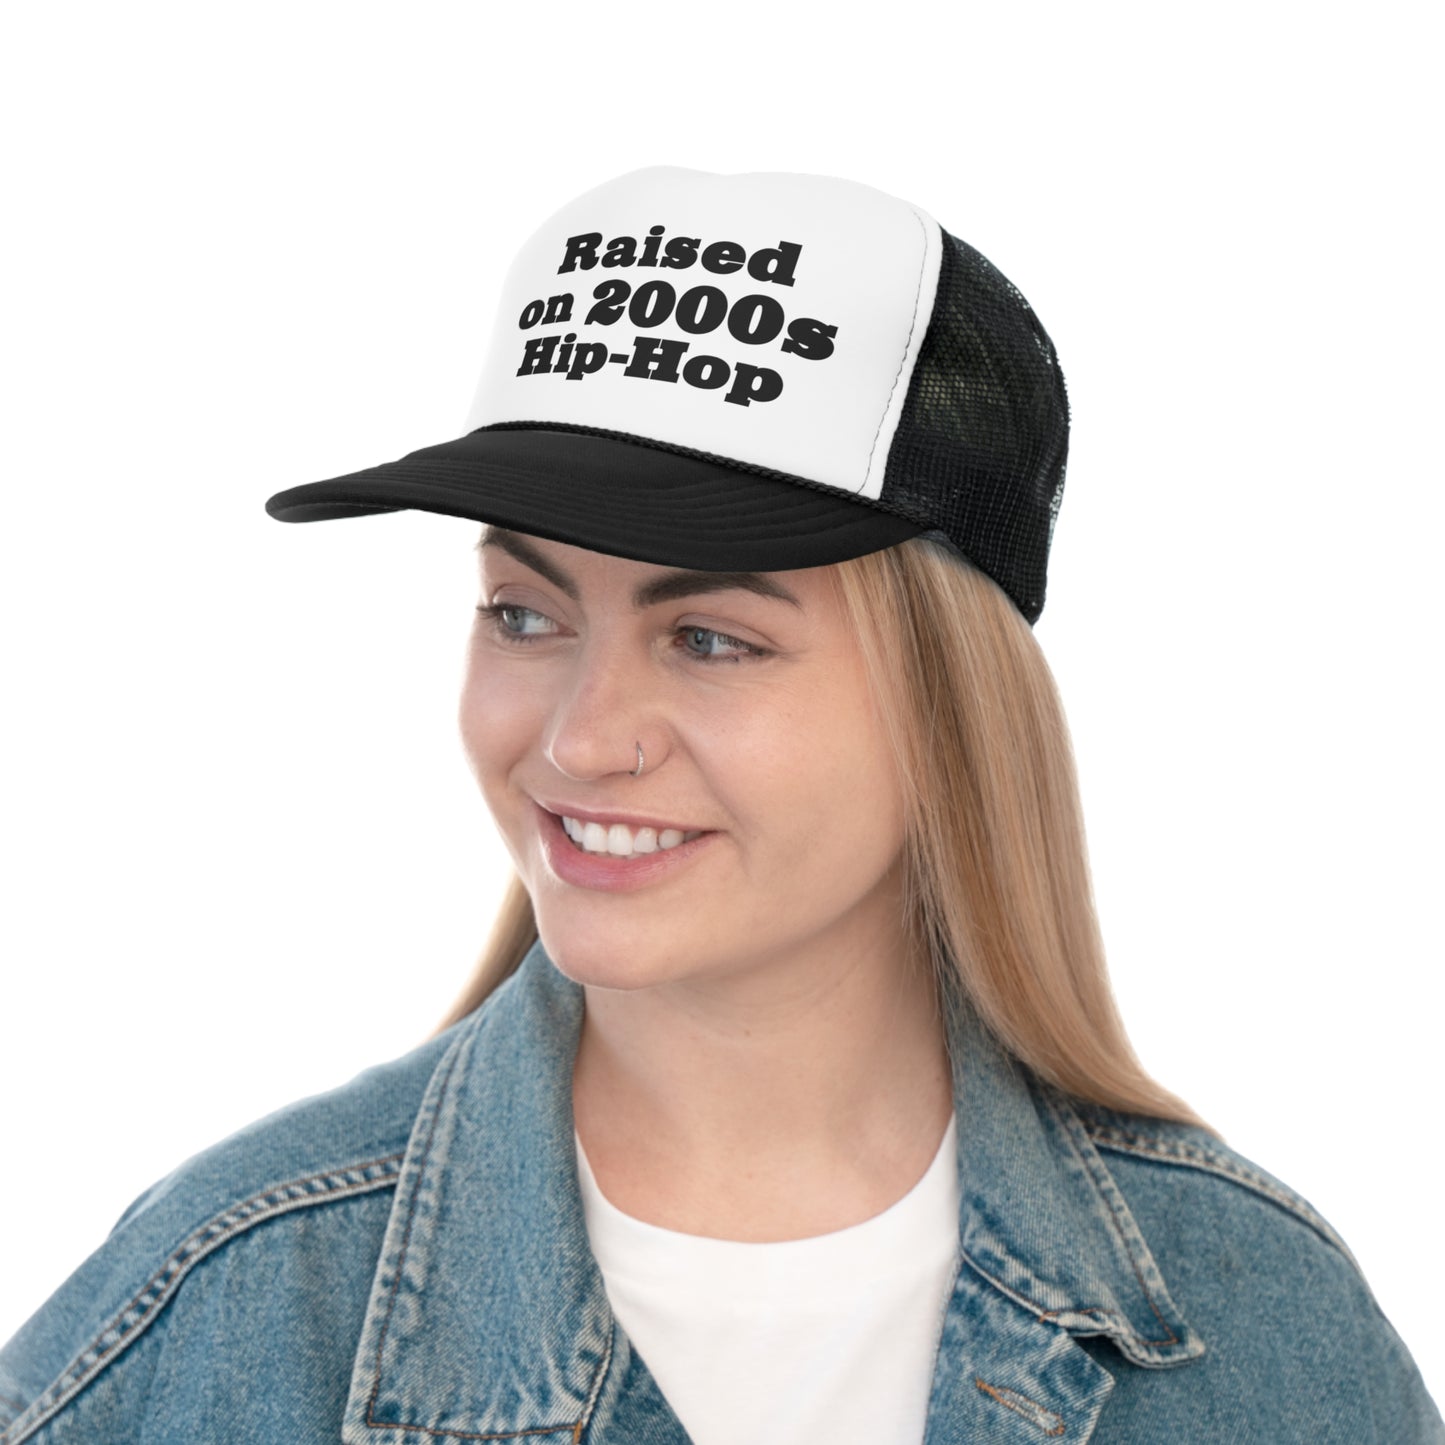 Raised on 2000s Hip-Hop Snapback Trucker Hat Great gift for a 2000s Hip-Hop & Rap Lover Hat